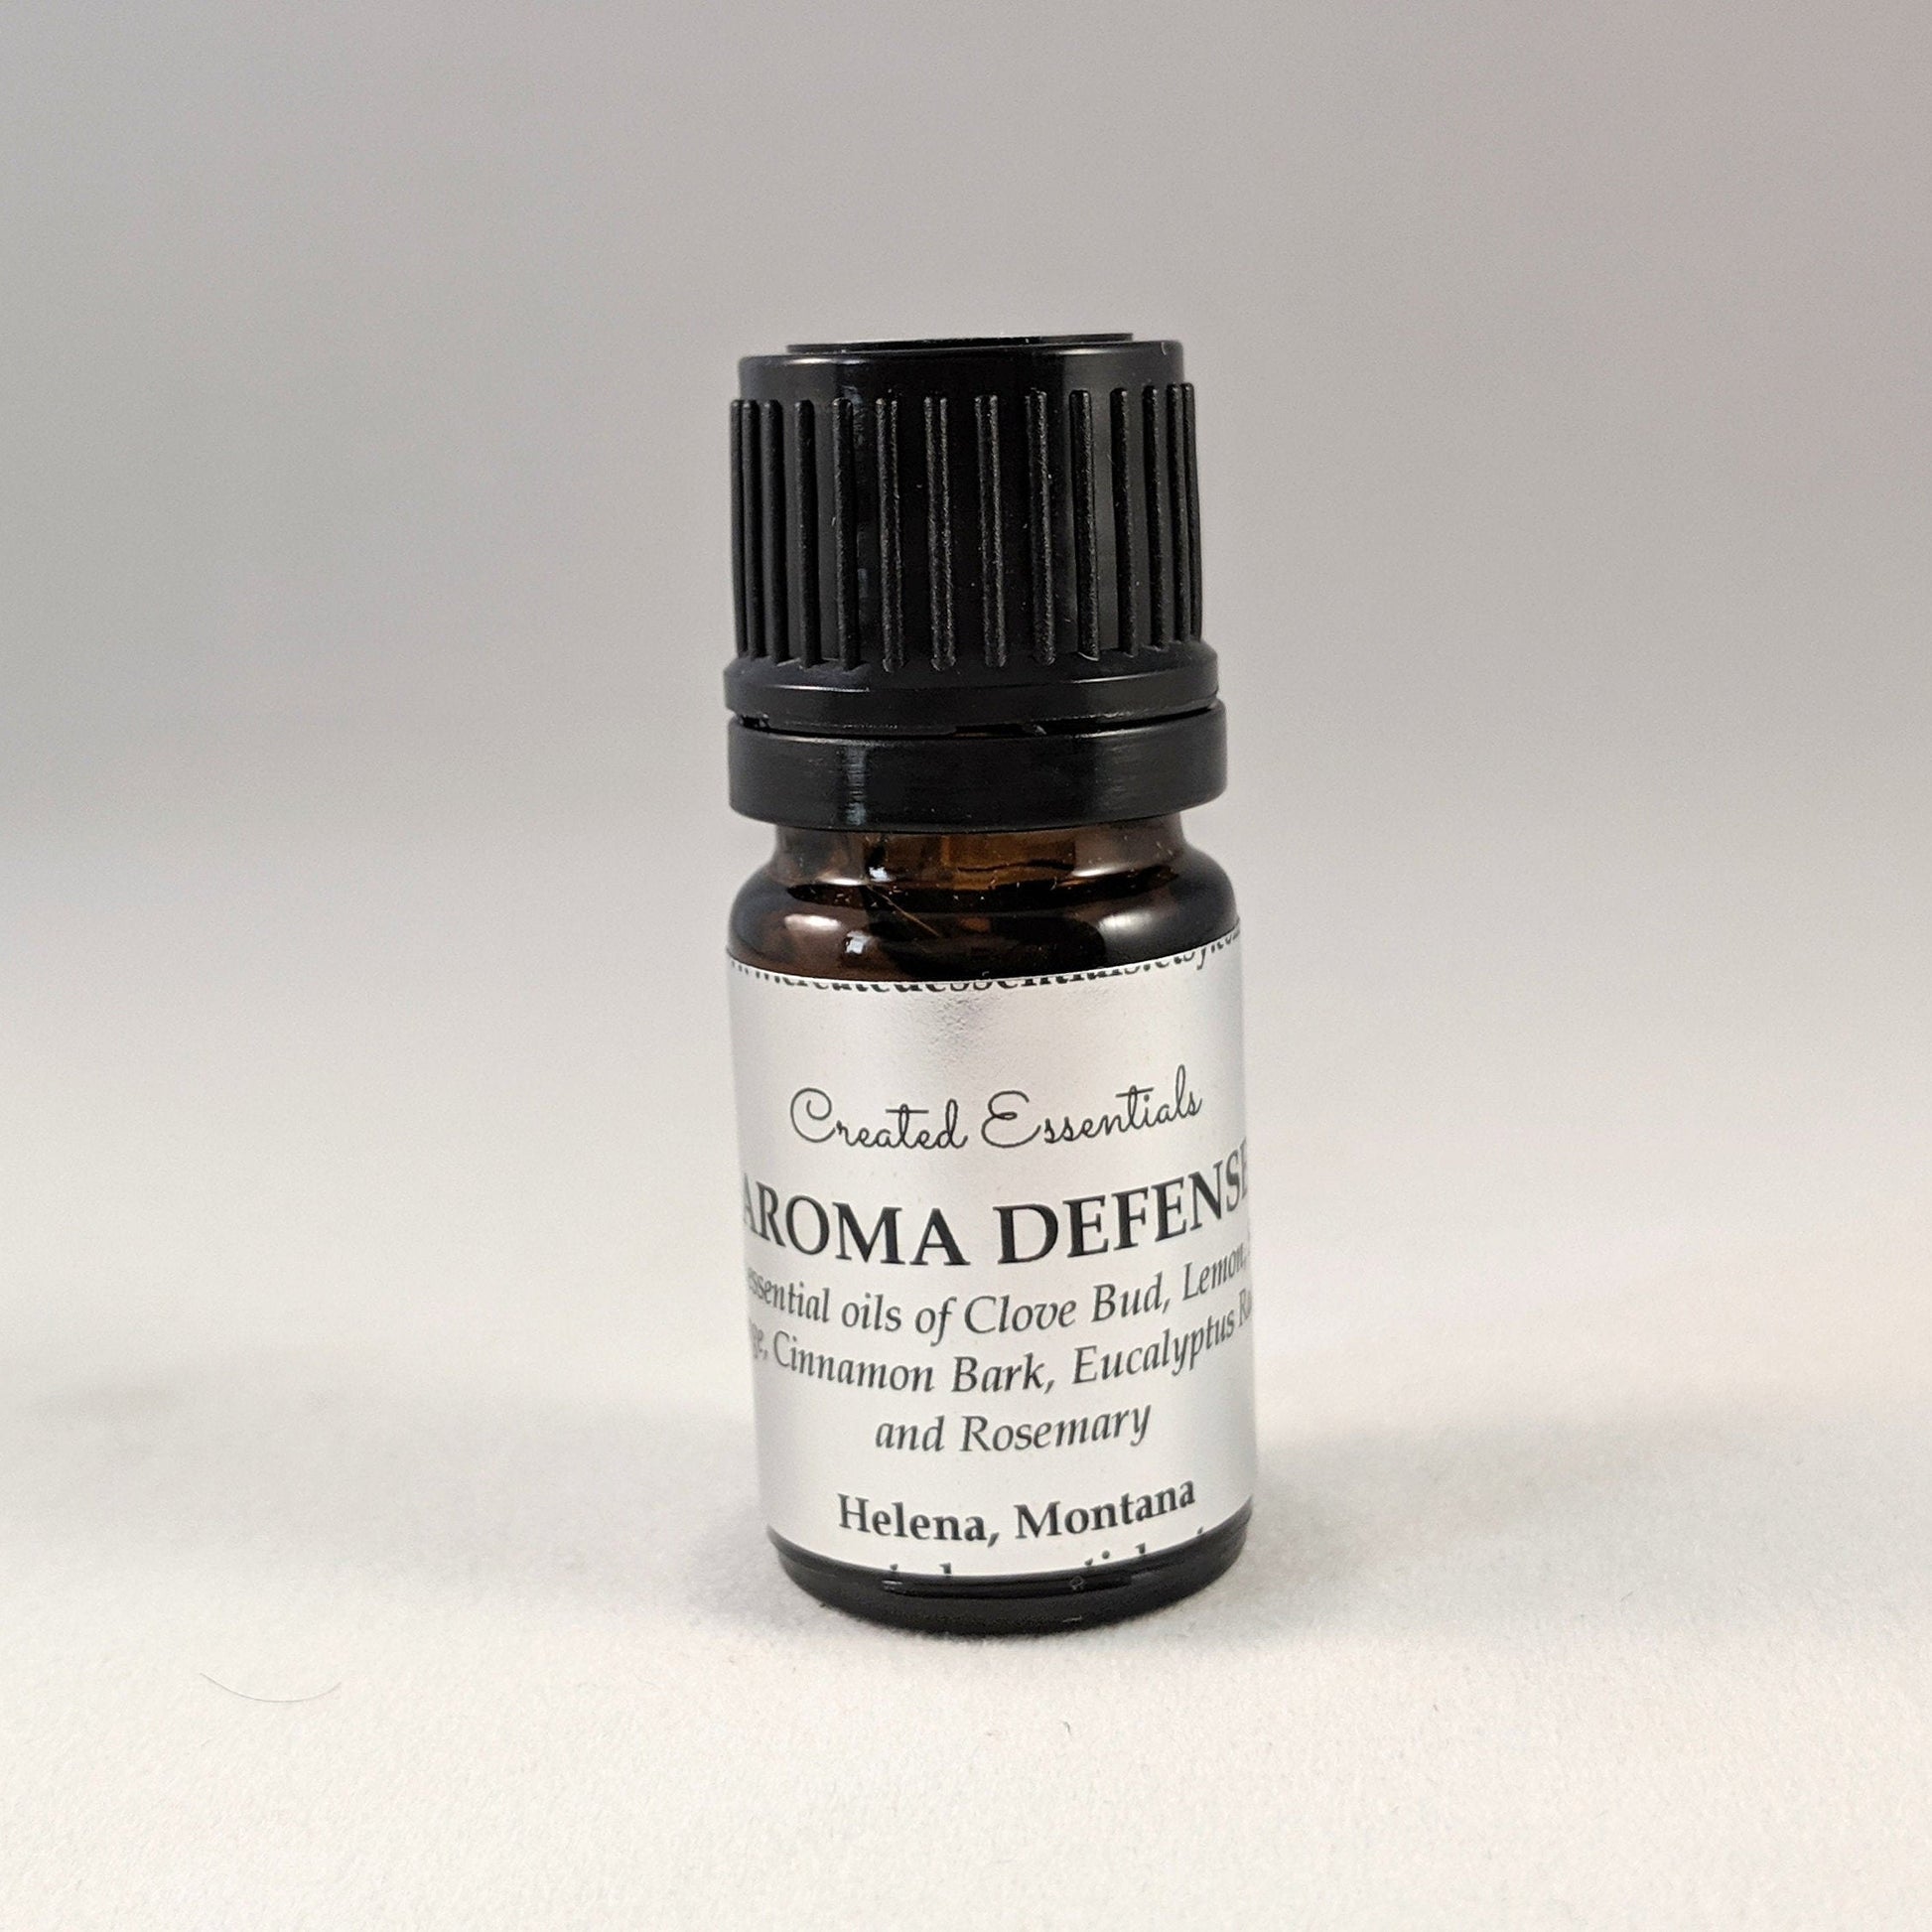 Aroma Defense Essential Oil Blend, Aroma Defense Essential Oil, Essential Aroma Defense Oil, Ancient Thieves Oil Blend,